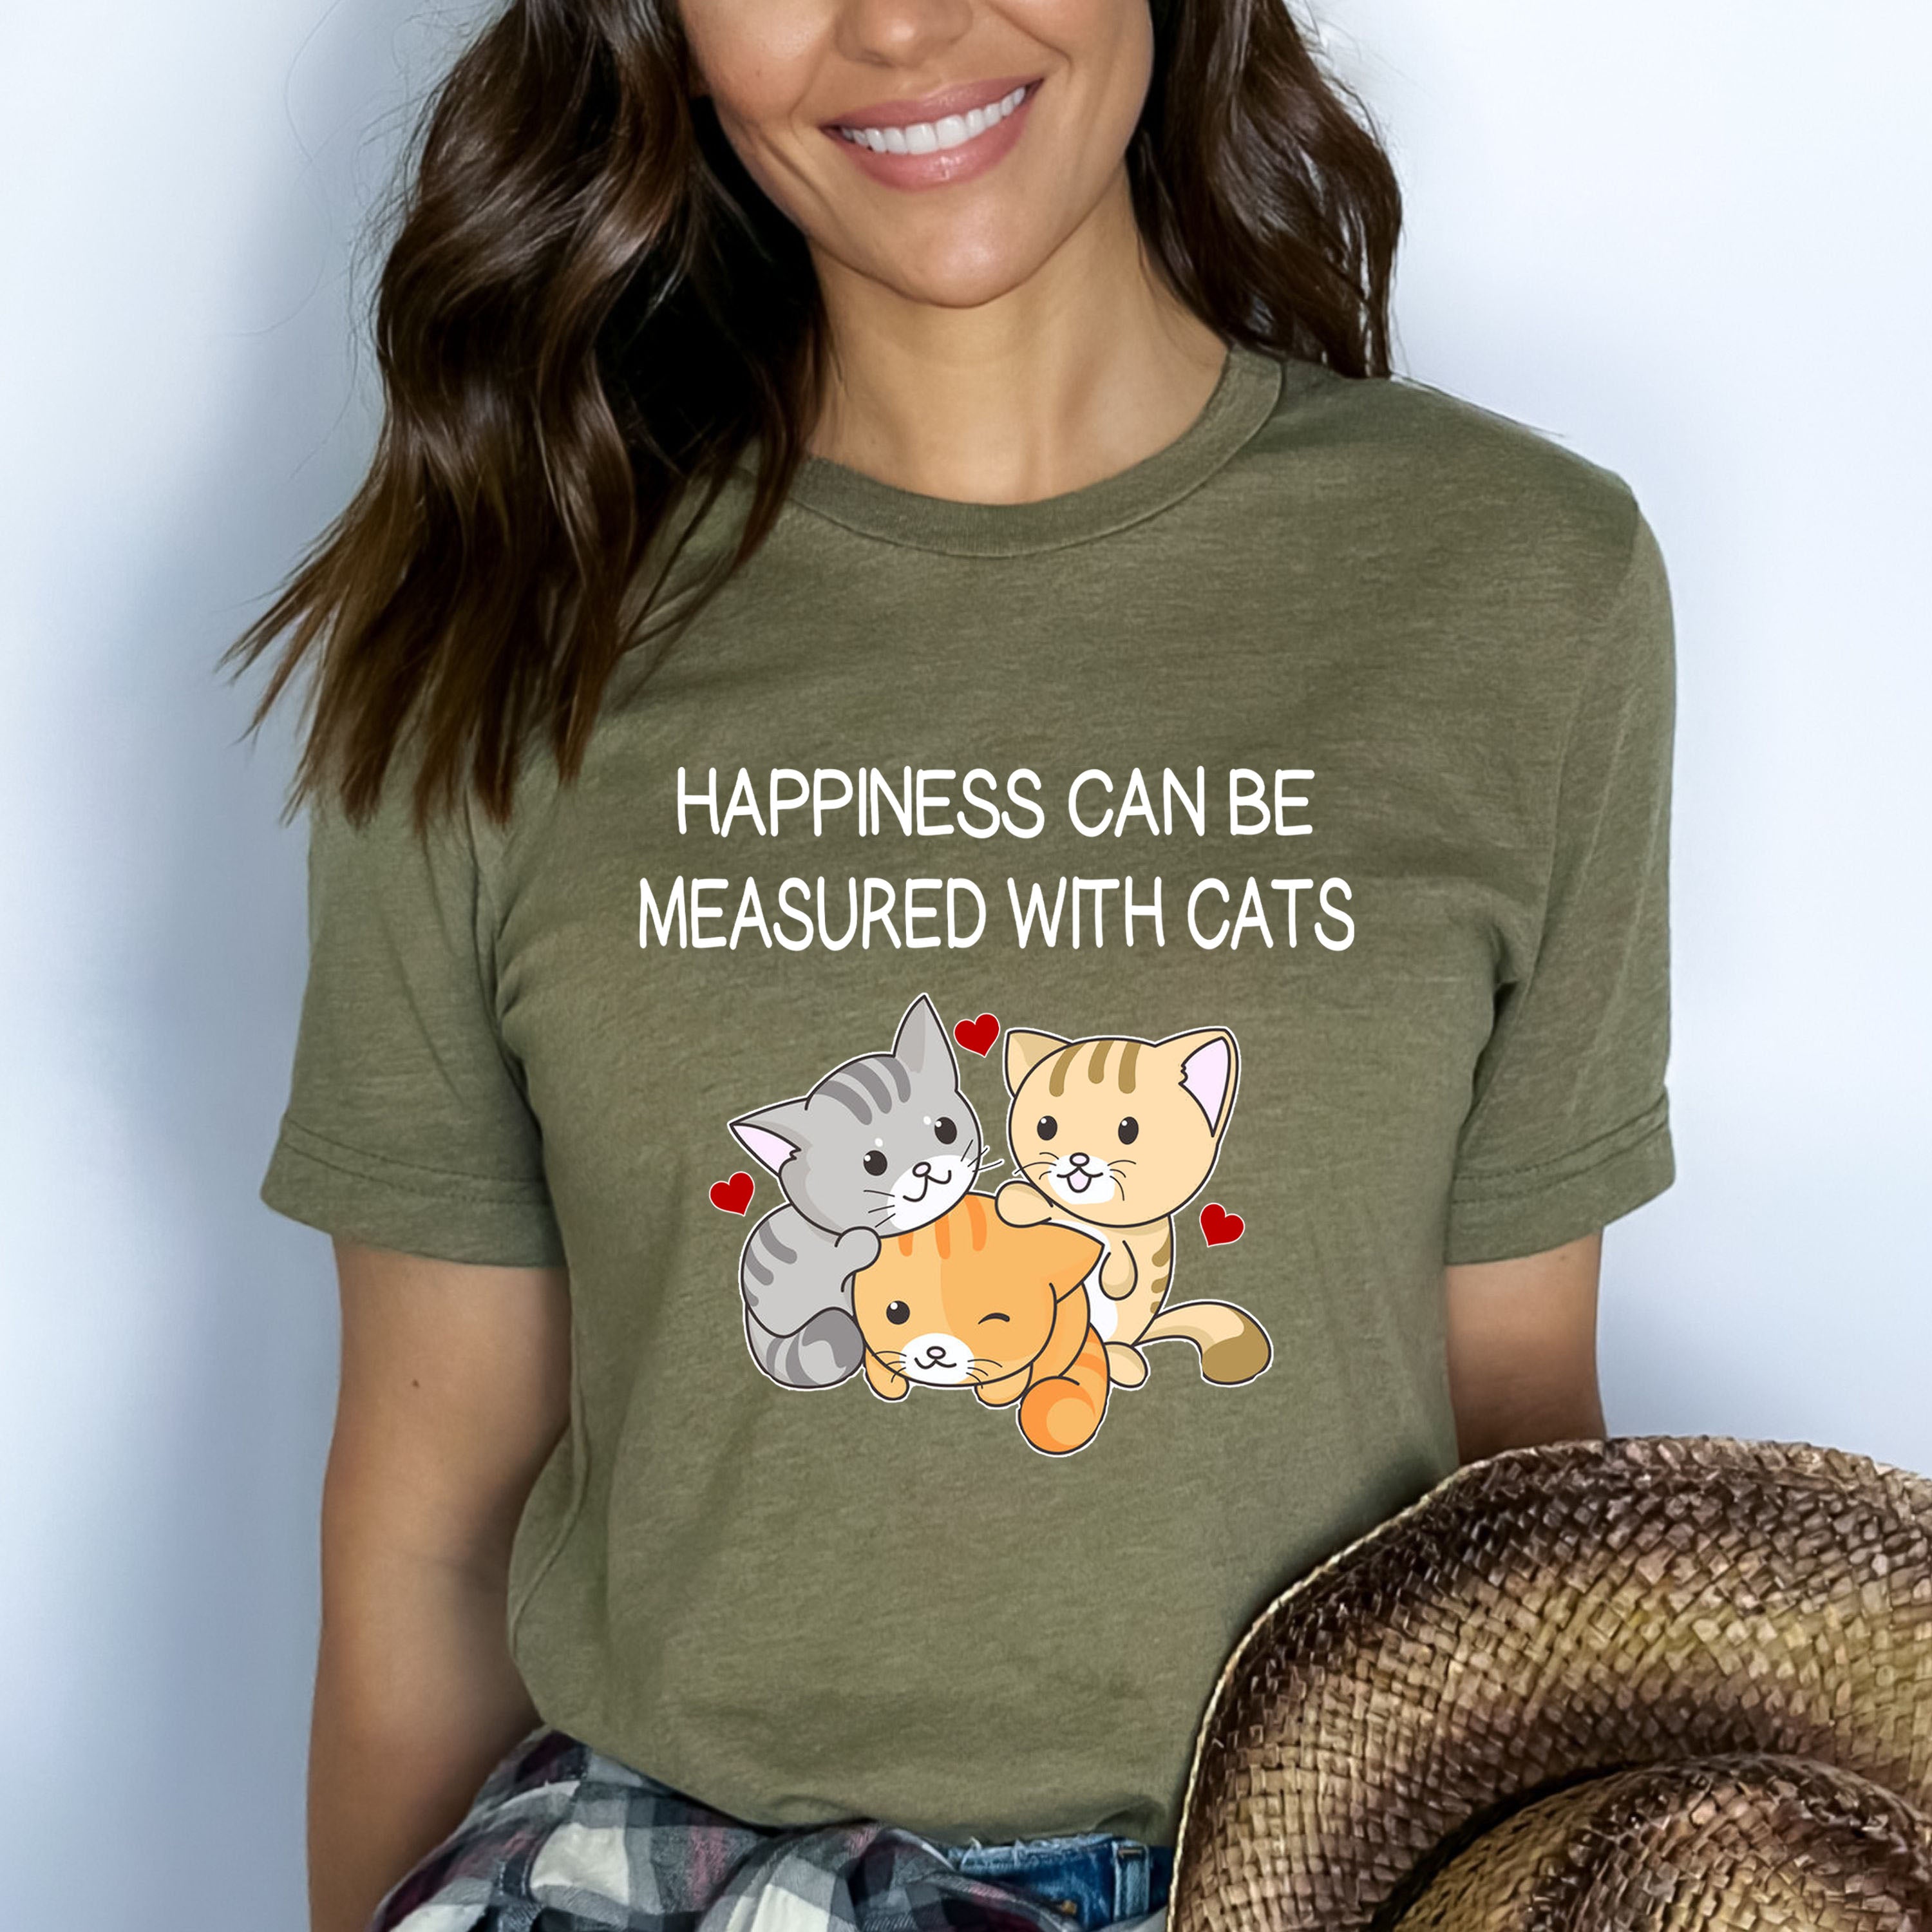 Happiness Can Be Measured With Cats - Bella canvas